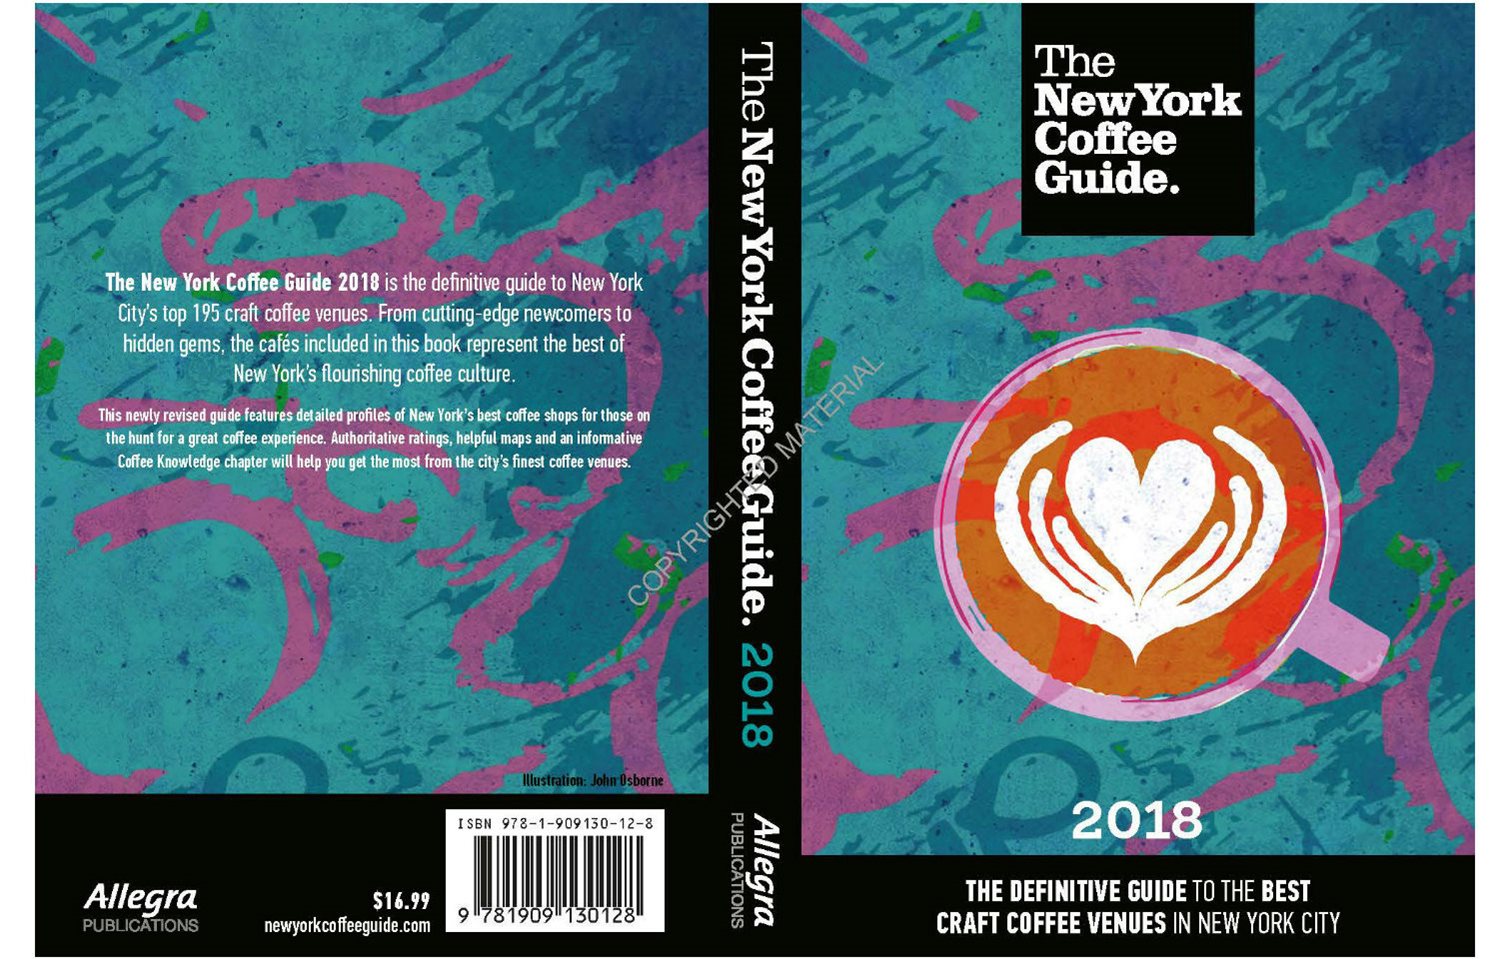 The New York Coffee Guide 2018